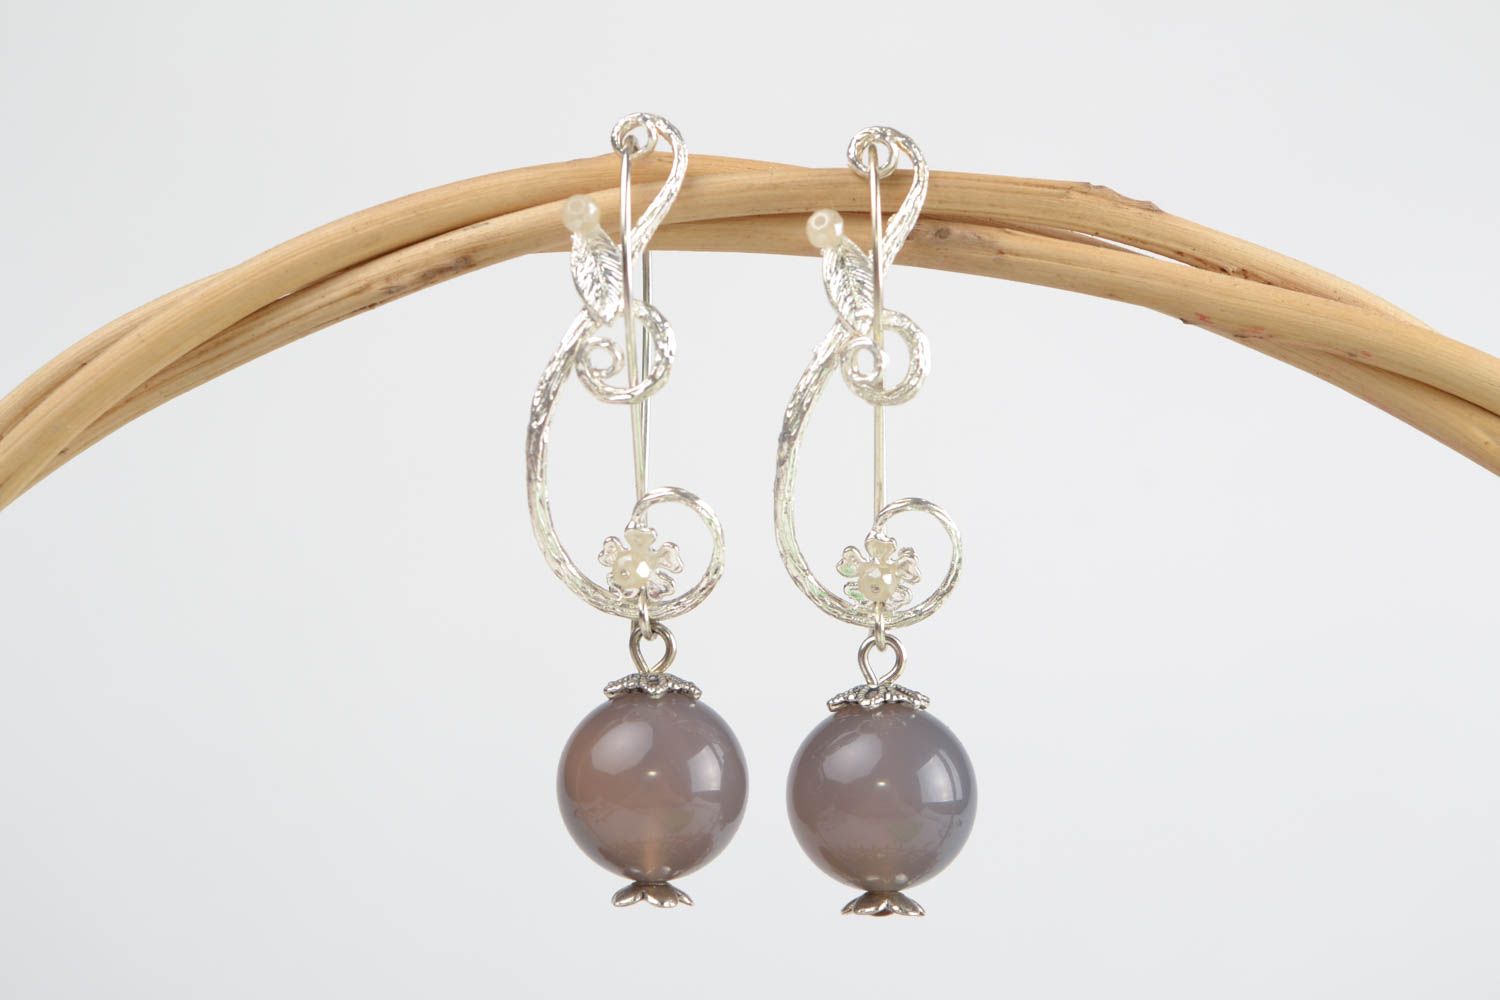 Handmade exquisite dangling earrings with fancy fittings and gray agate beads photo 1